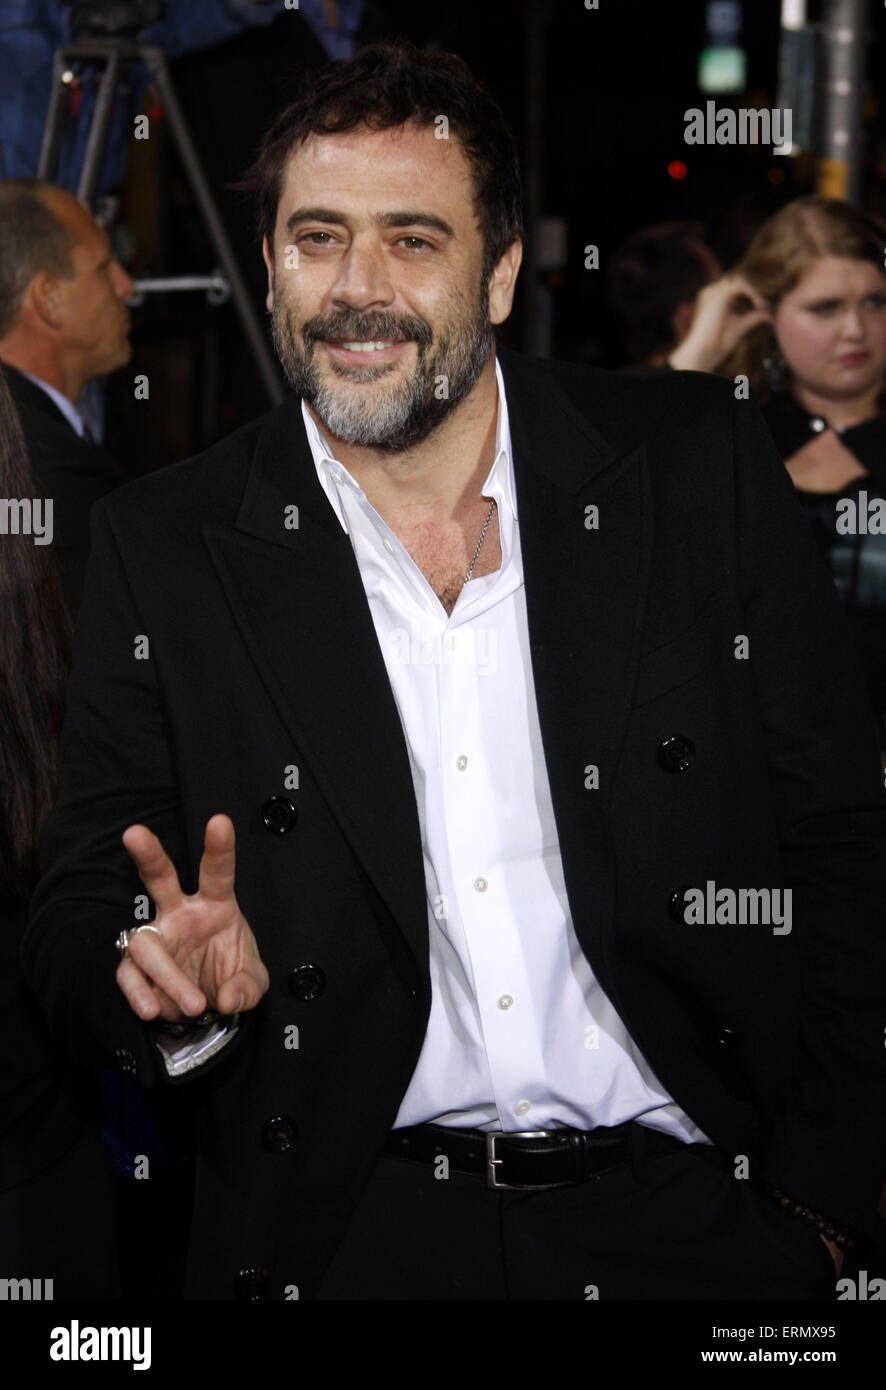 Jeffrey Dean Morgan at the Los Angeles premiere of 'The Twilight Saga: New Moon' held at the Mann's Village Theatre in Westwood on November 16, 2009. Stock Photo